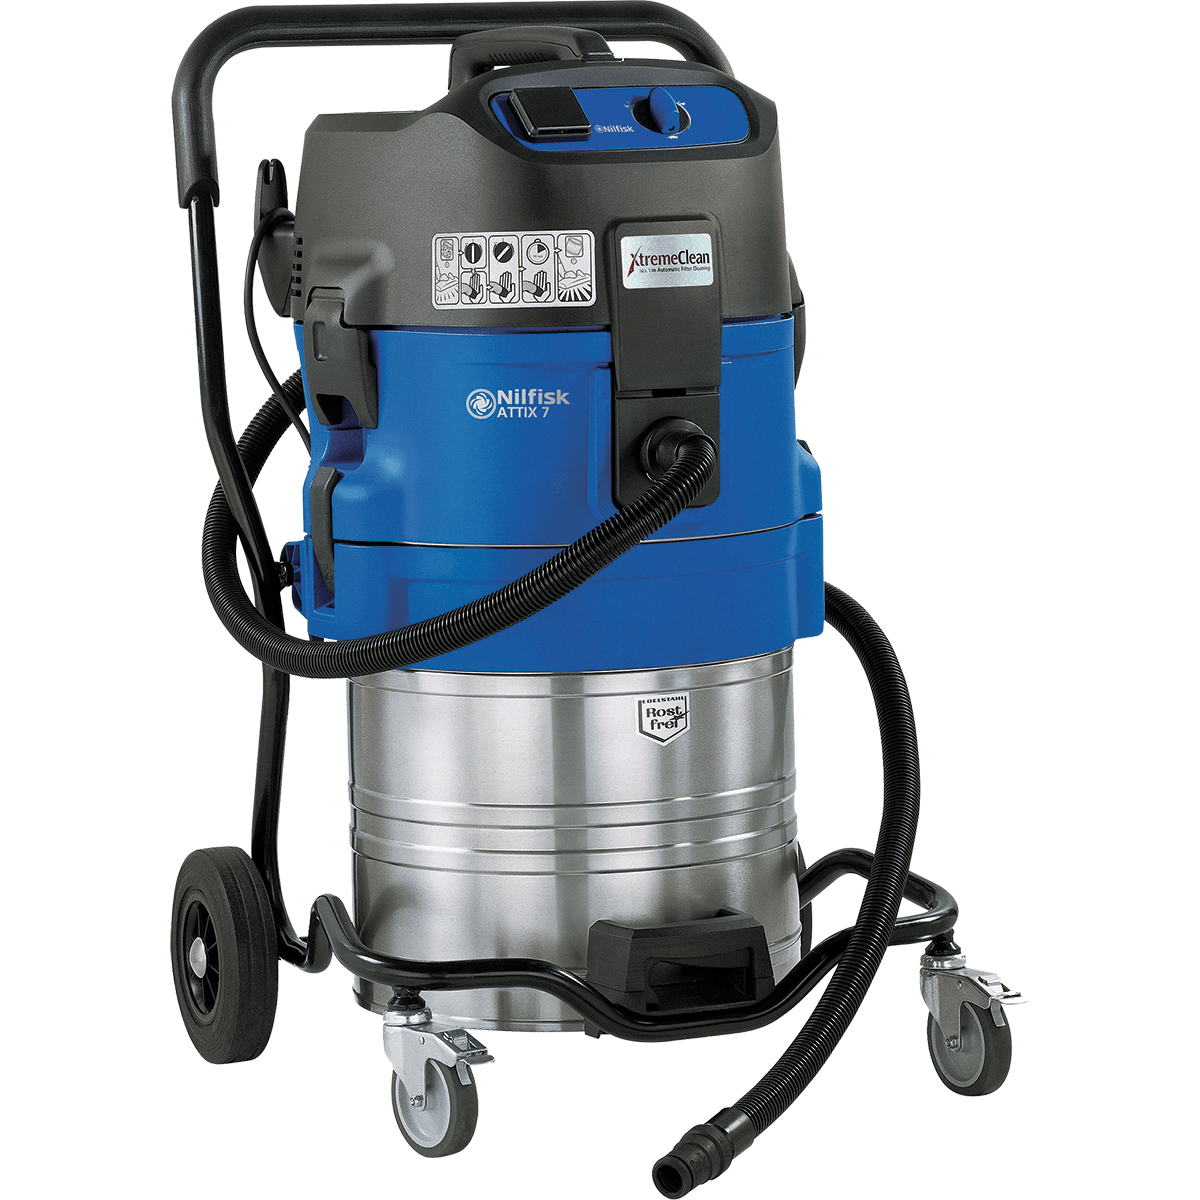 Nilfisk Attix 19 HEPA AS/E XC Vacuum Xtreme Clean Self-Cleaning Filter System - 120V (900138)